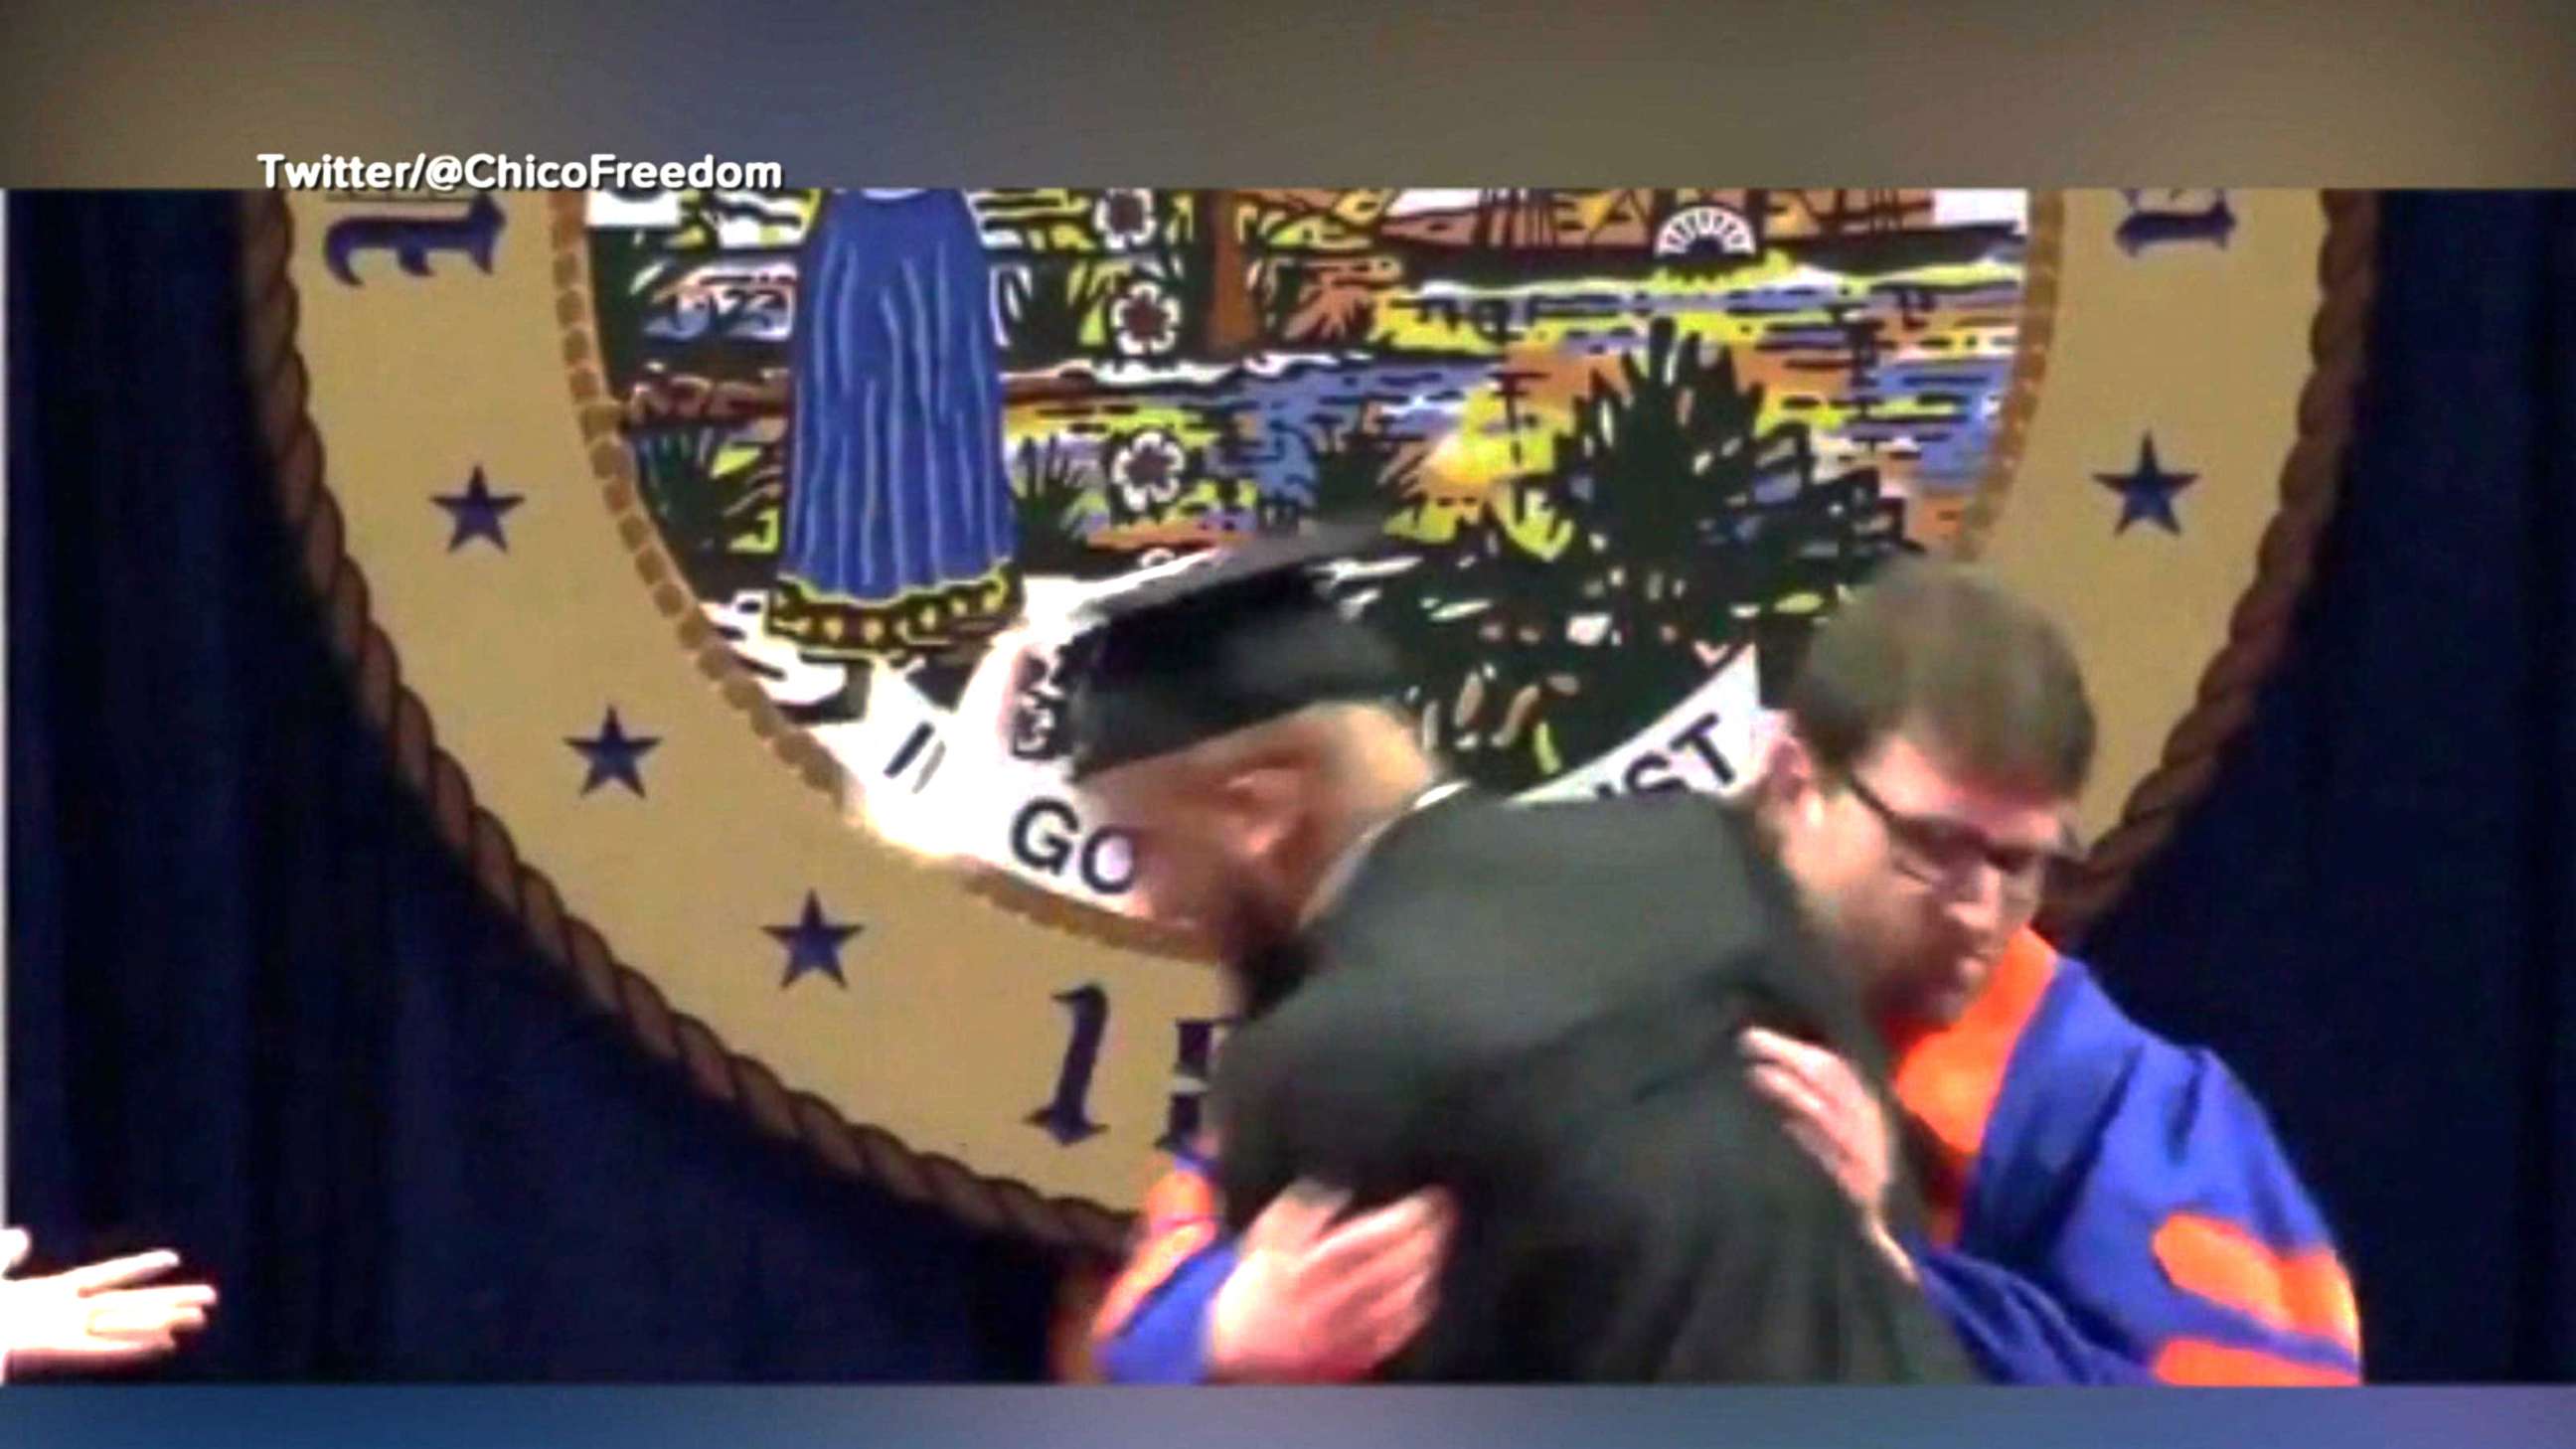 PHOTO: A university usher rushes a student off stage during a commencement ceremony.